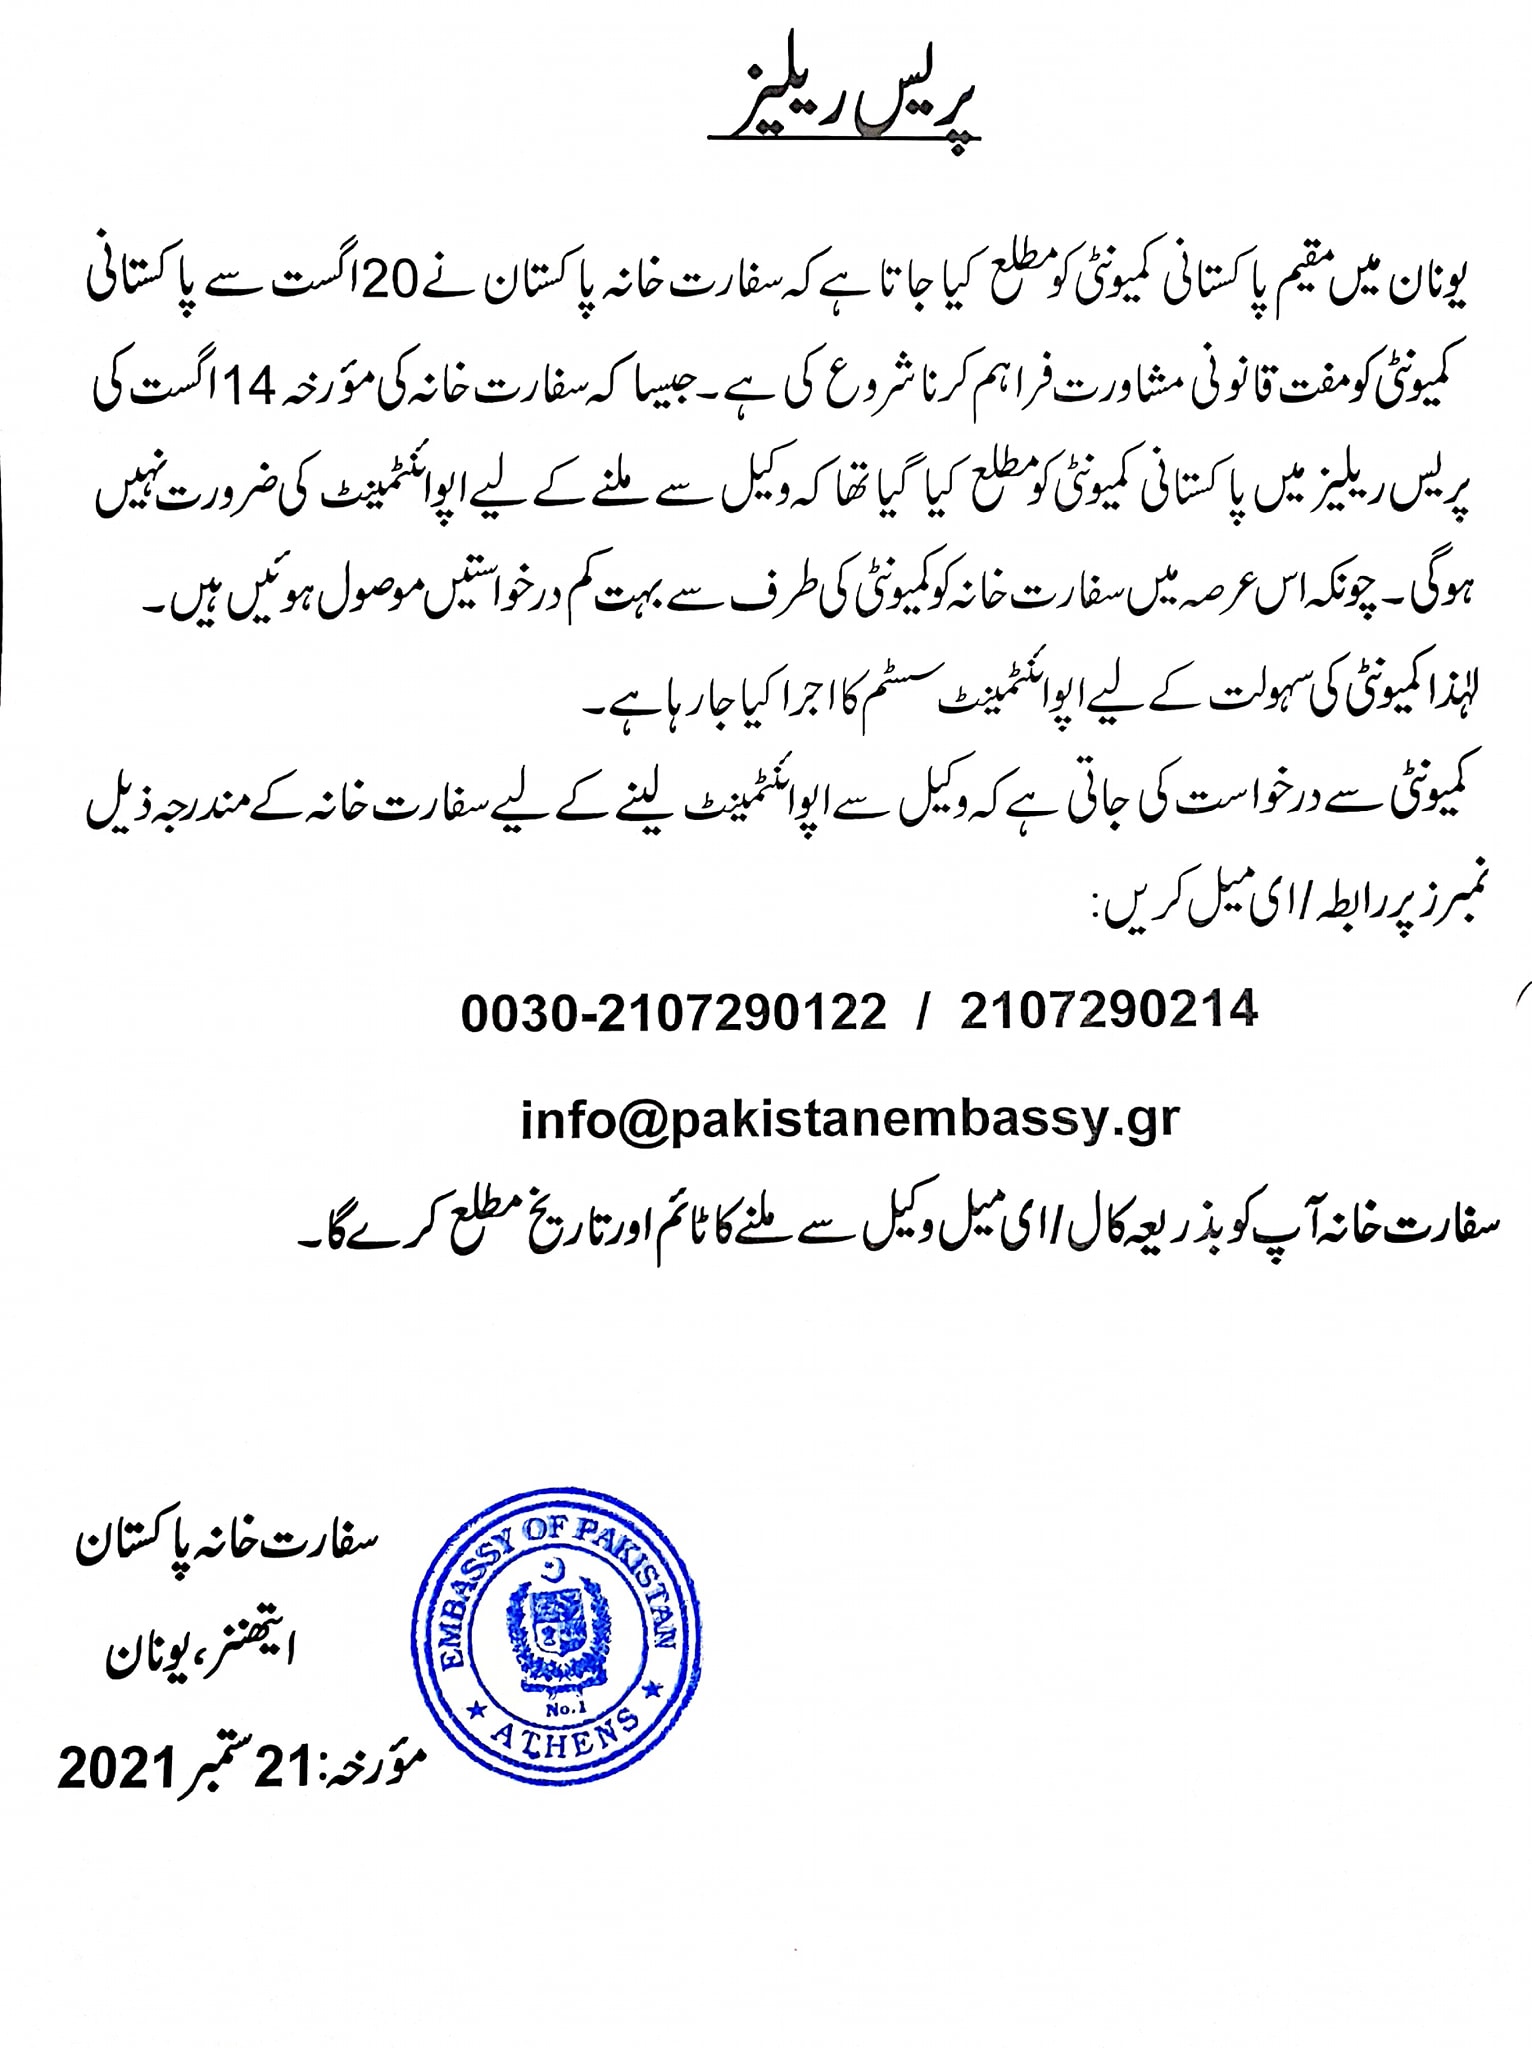 Free legal Assistance for Pakistani Community 